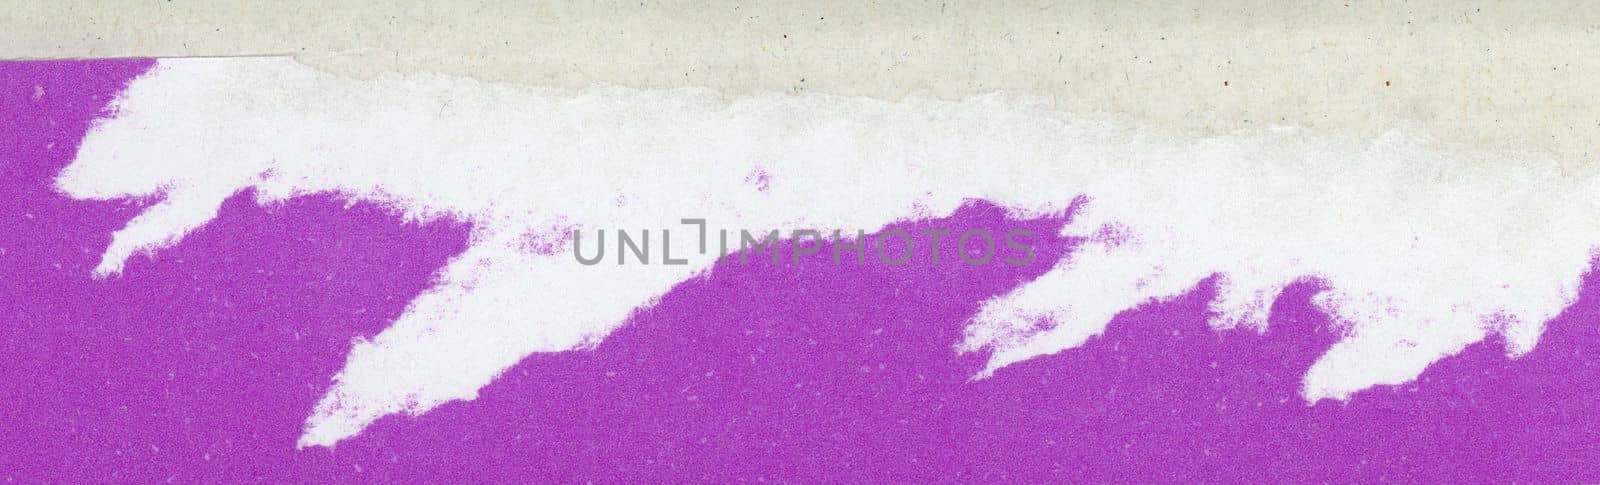 purple and white decollage cardboard texture useful as a background